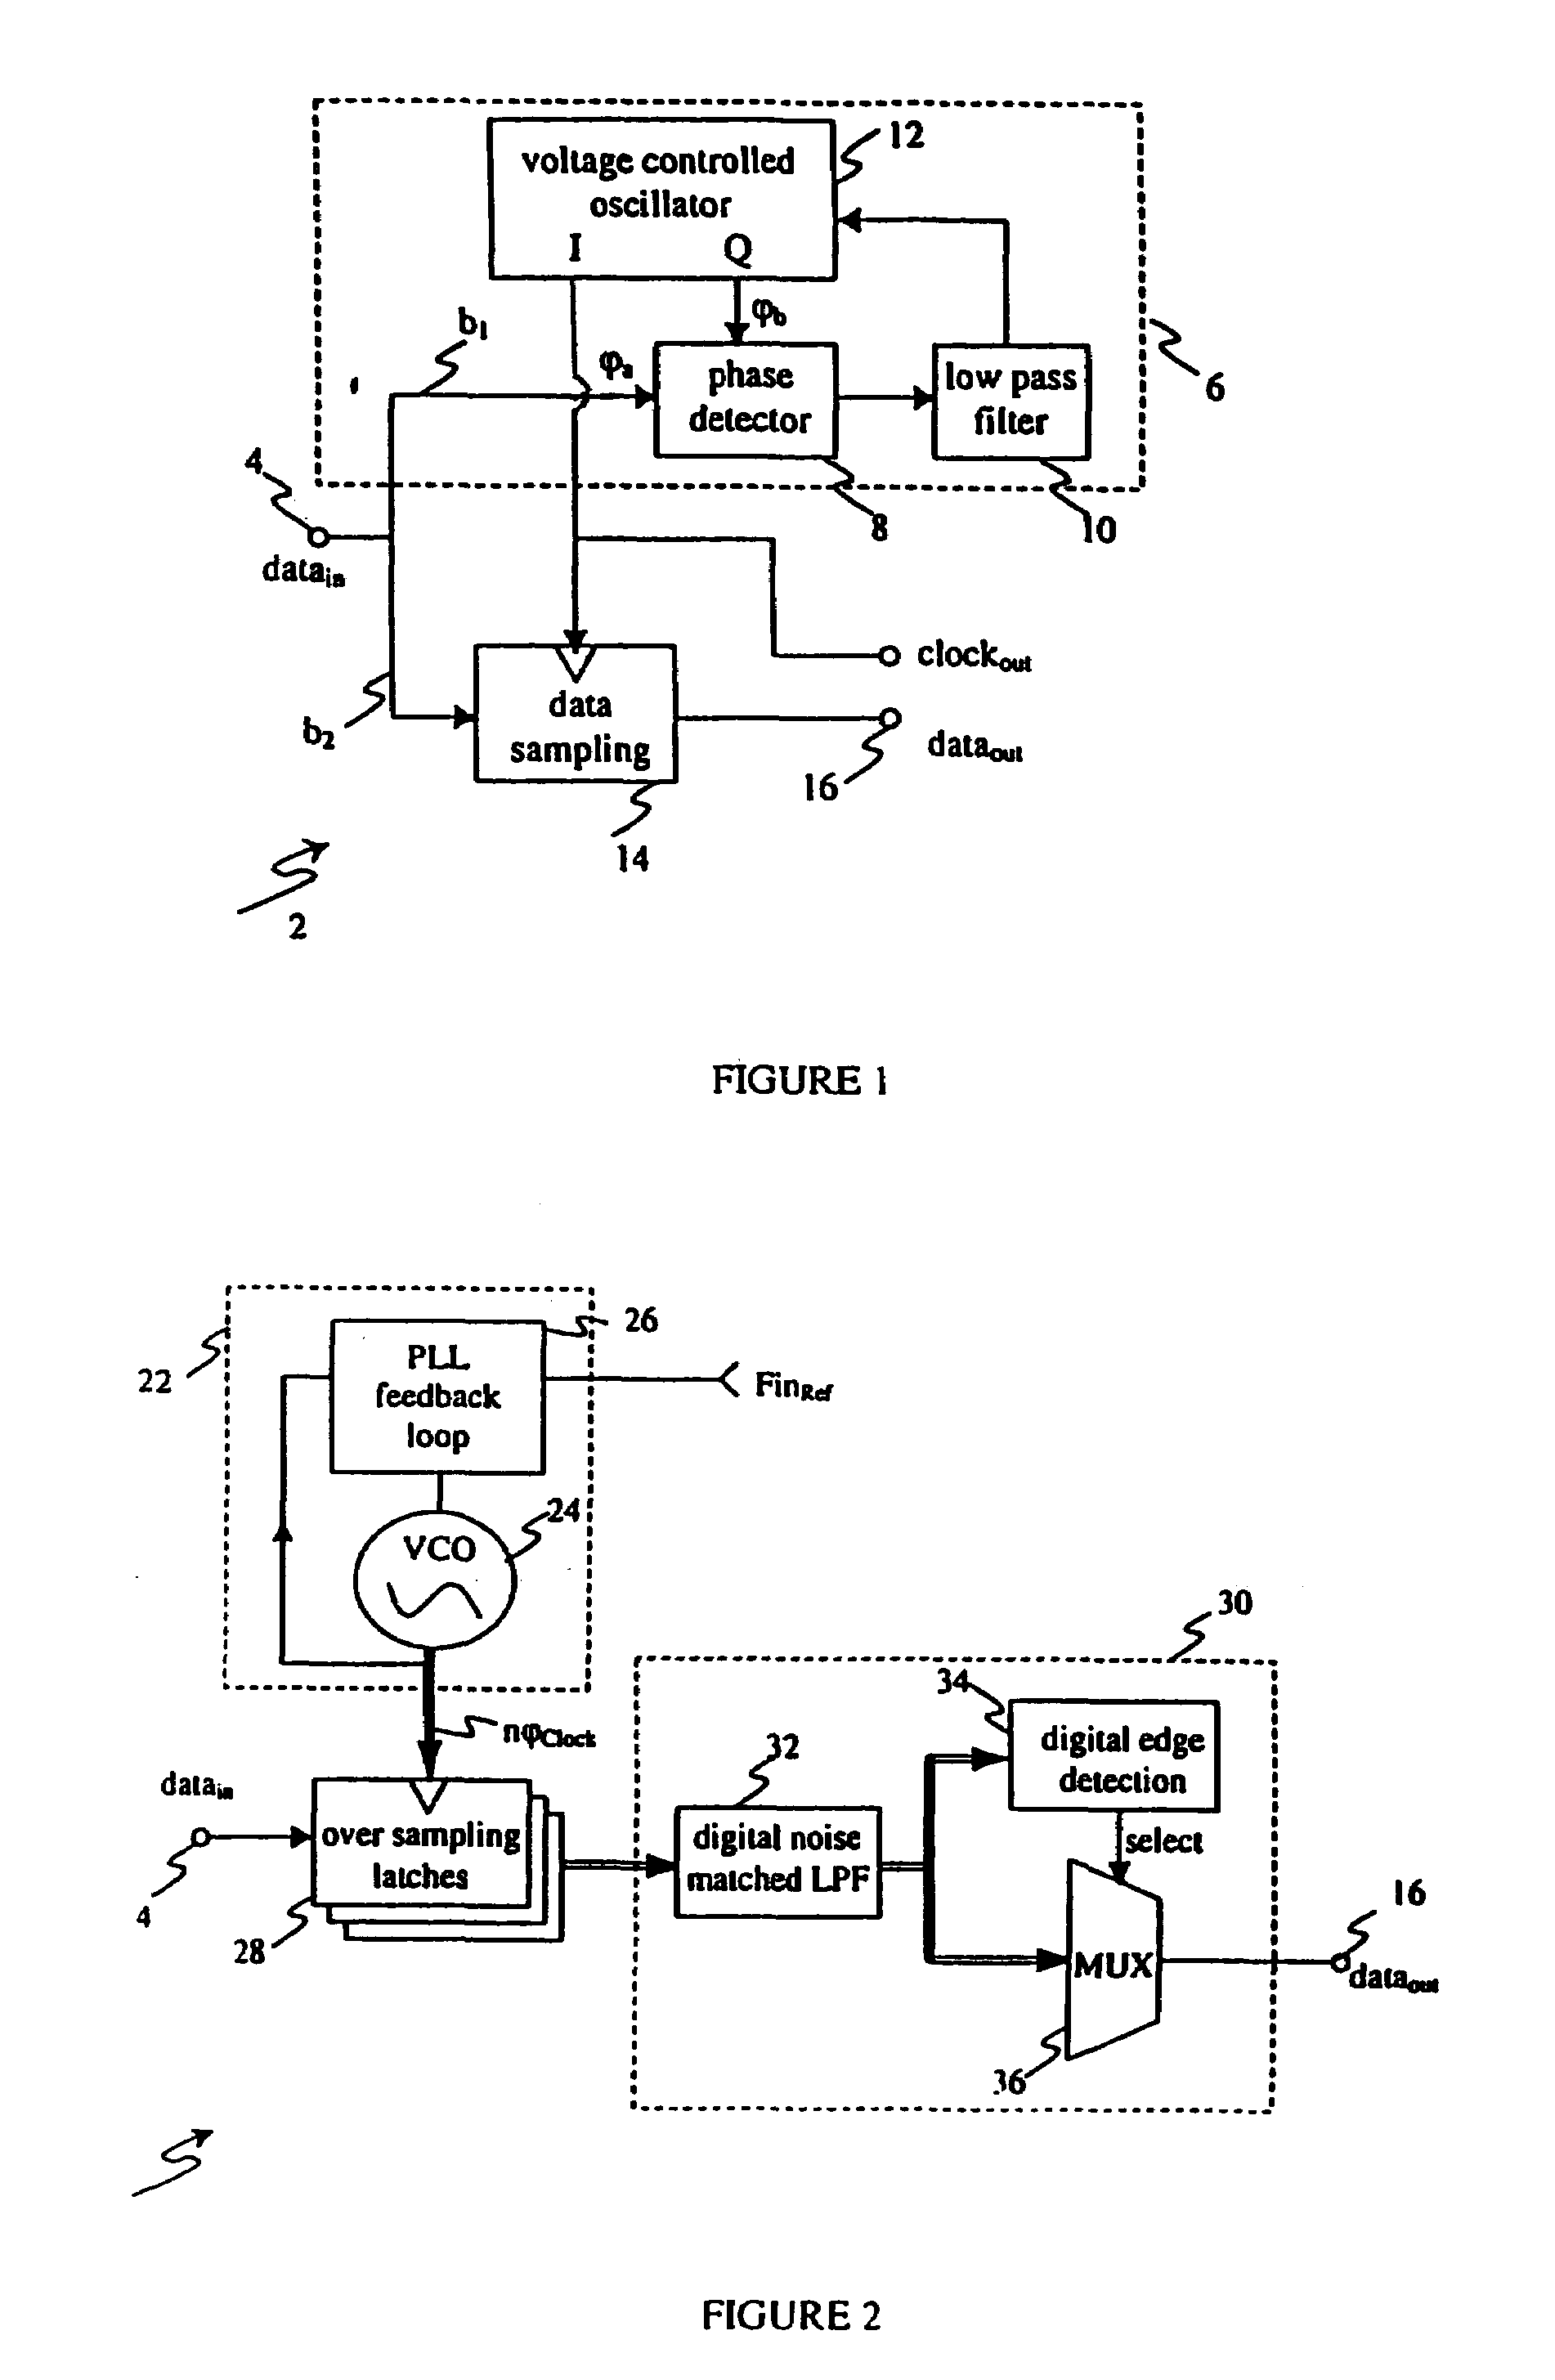 Phase rotator and data recovery receiver incorporating said phase rotator